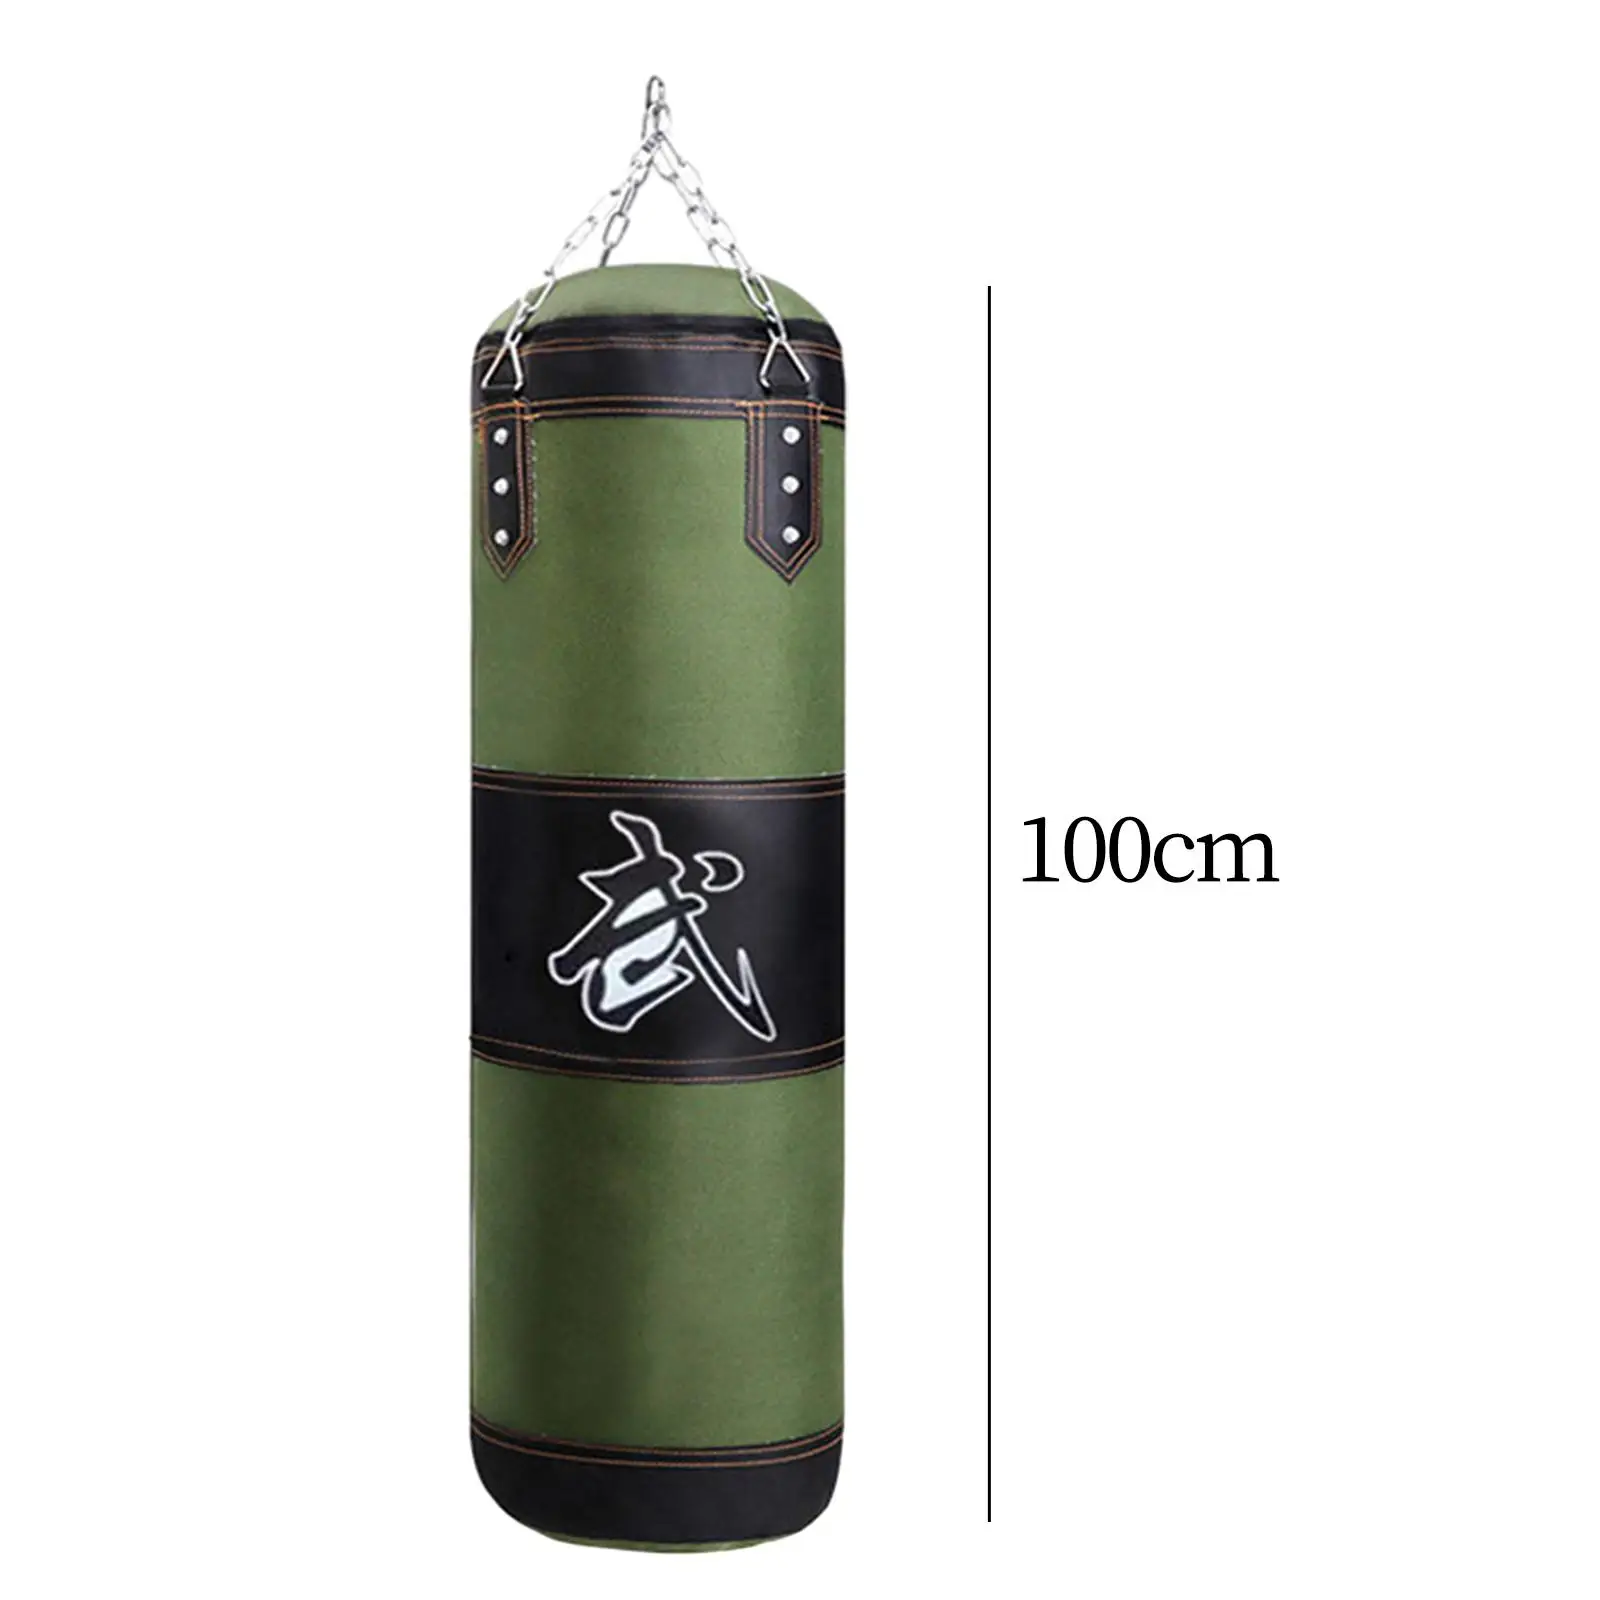 PU Punching Bag with Gloves Fitness Boxing Bag for Adults Kids Martial Arts